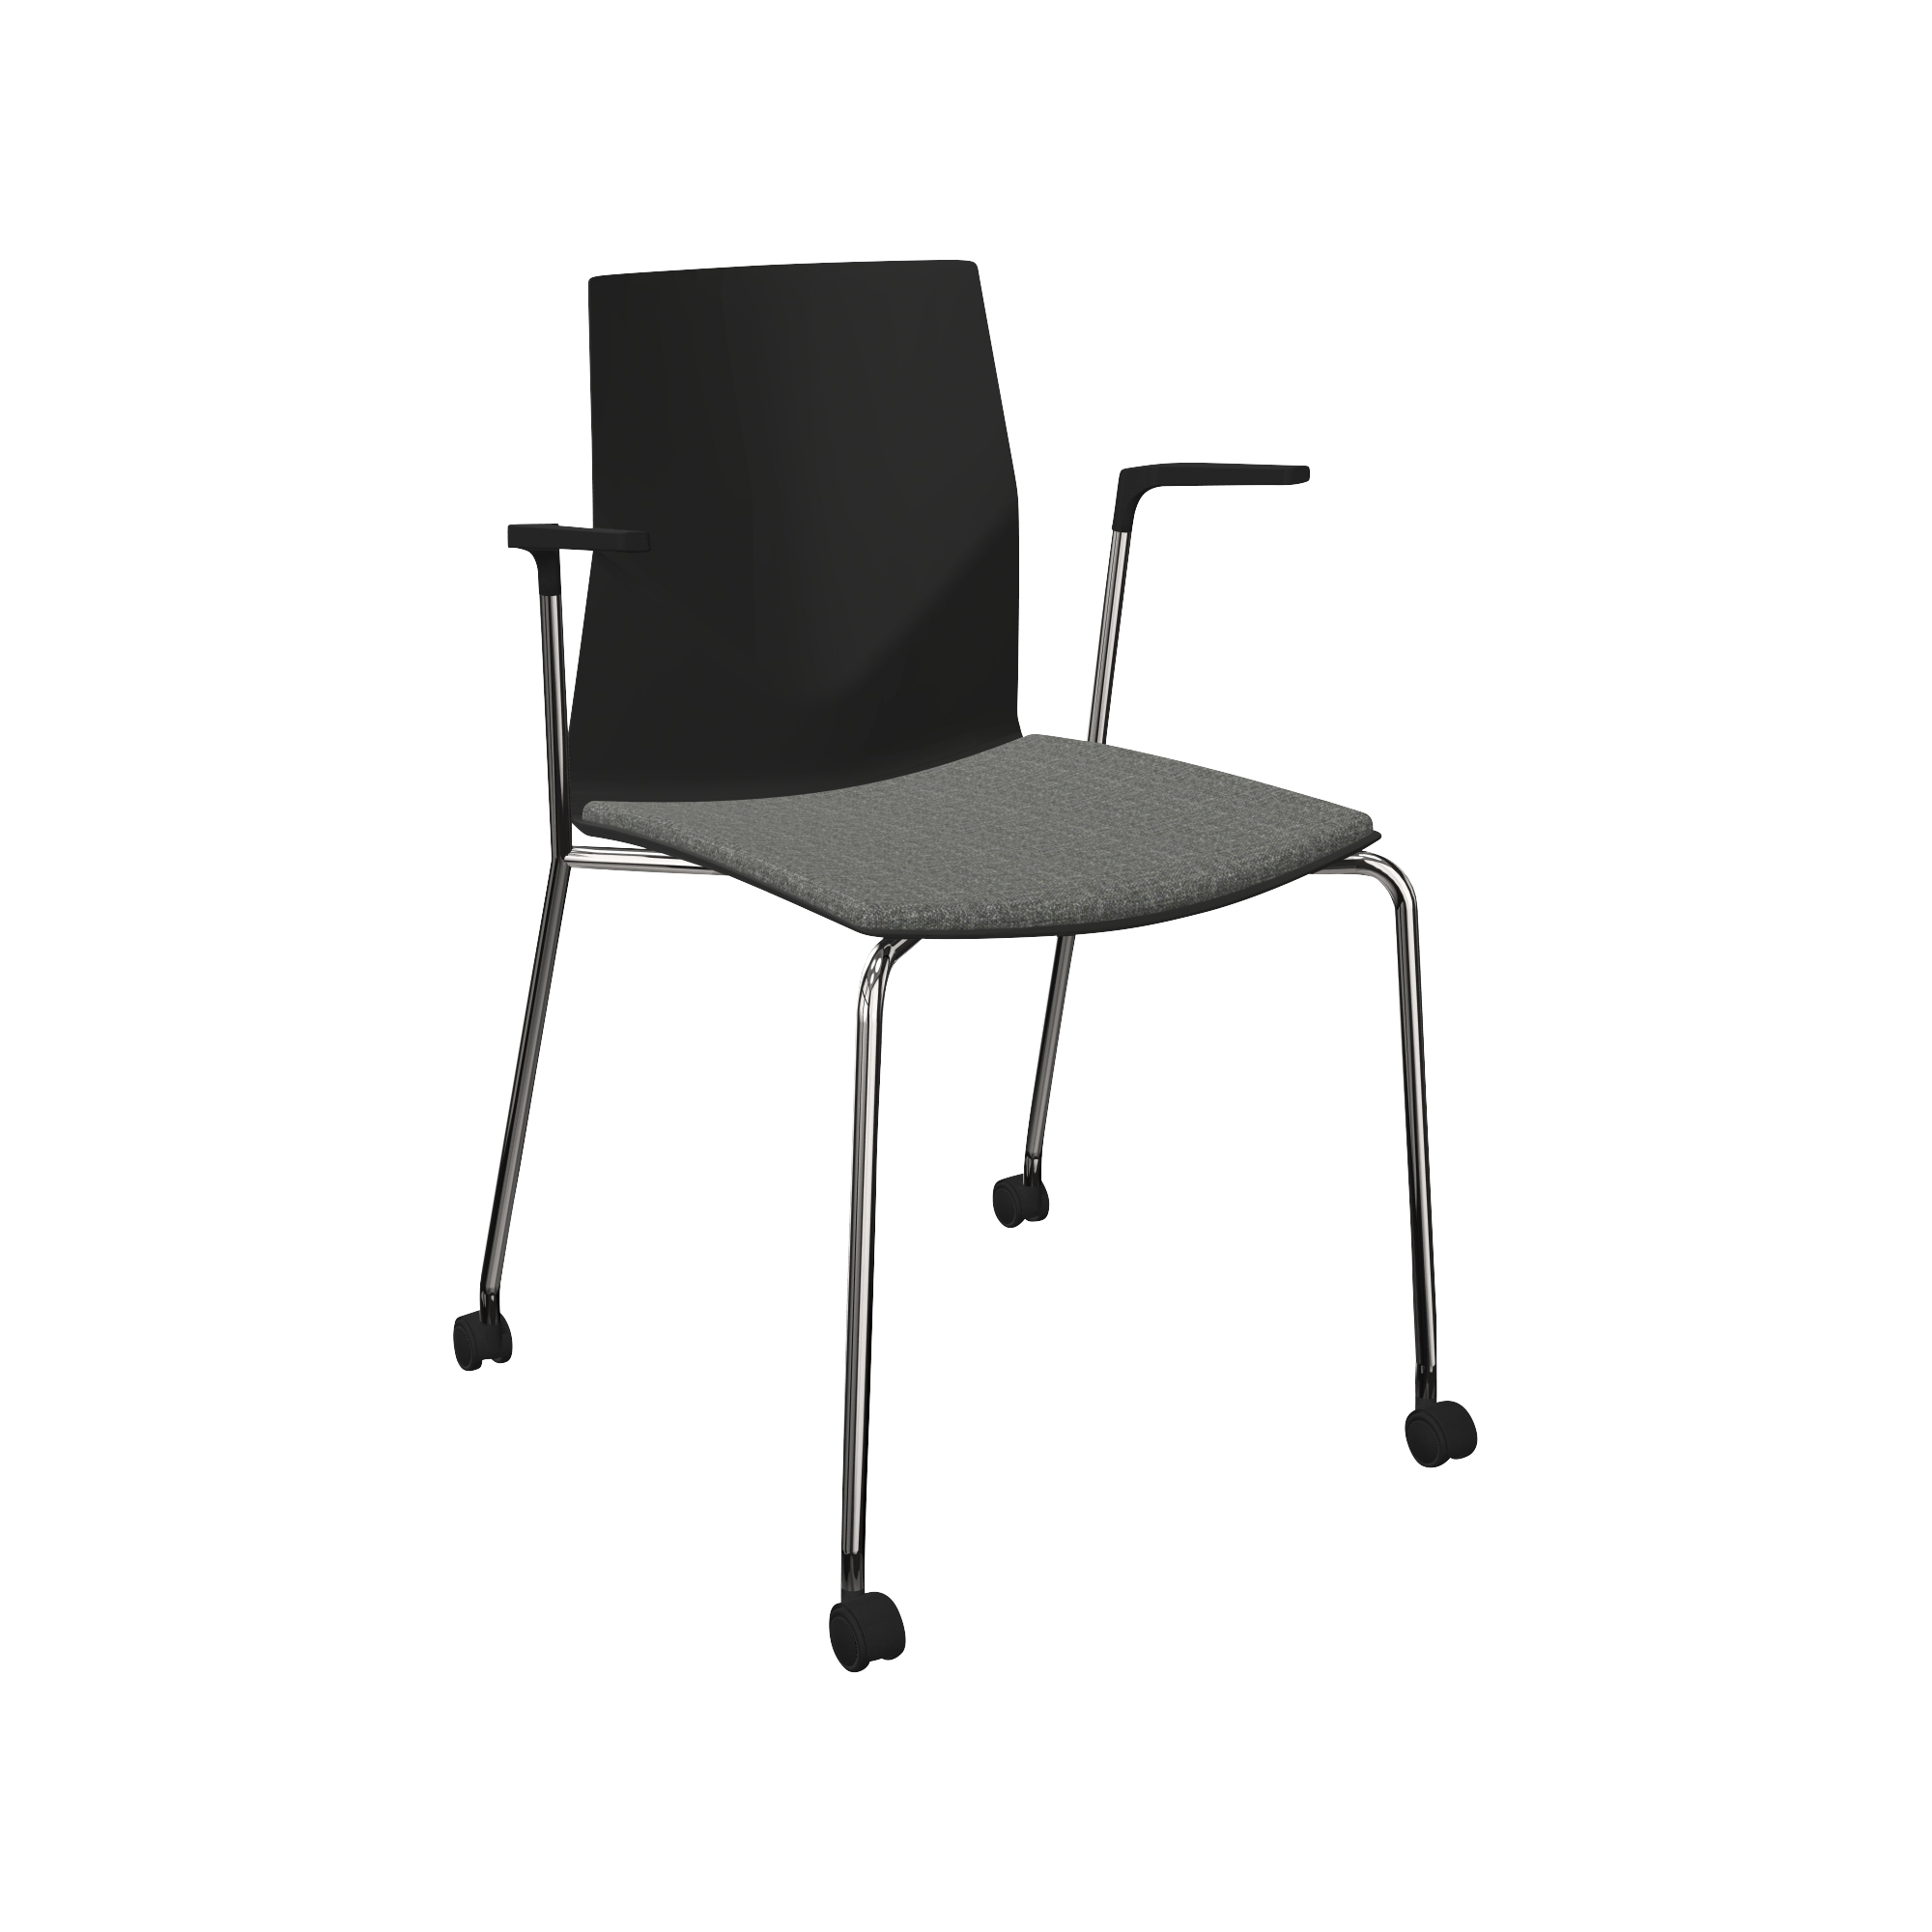 A black and grey chair with wheels